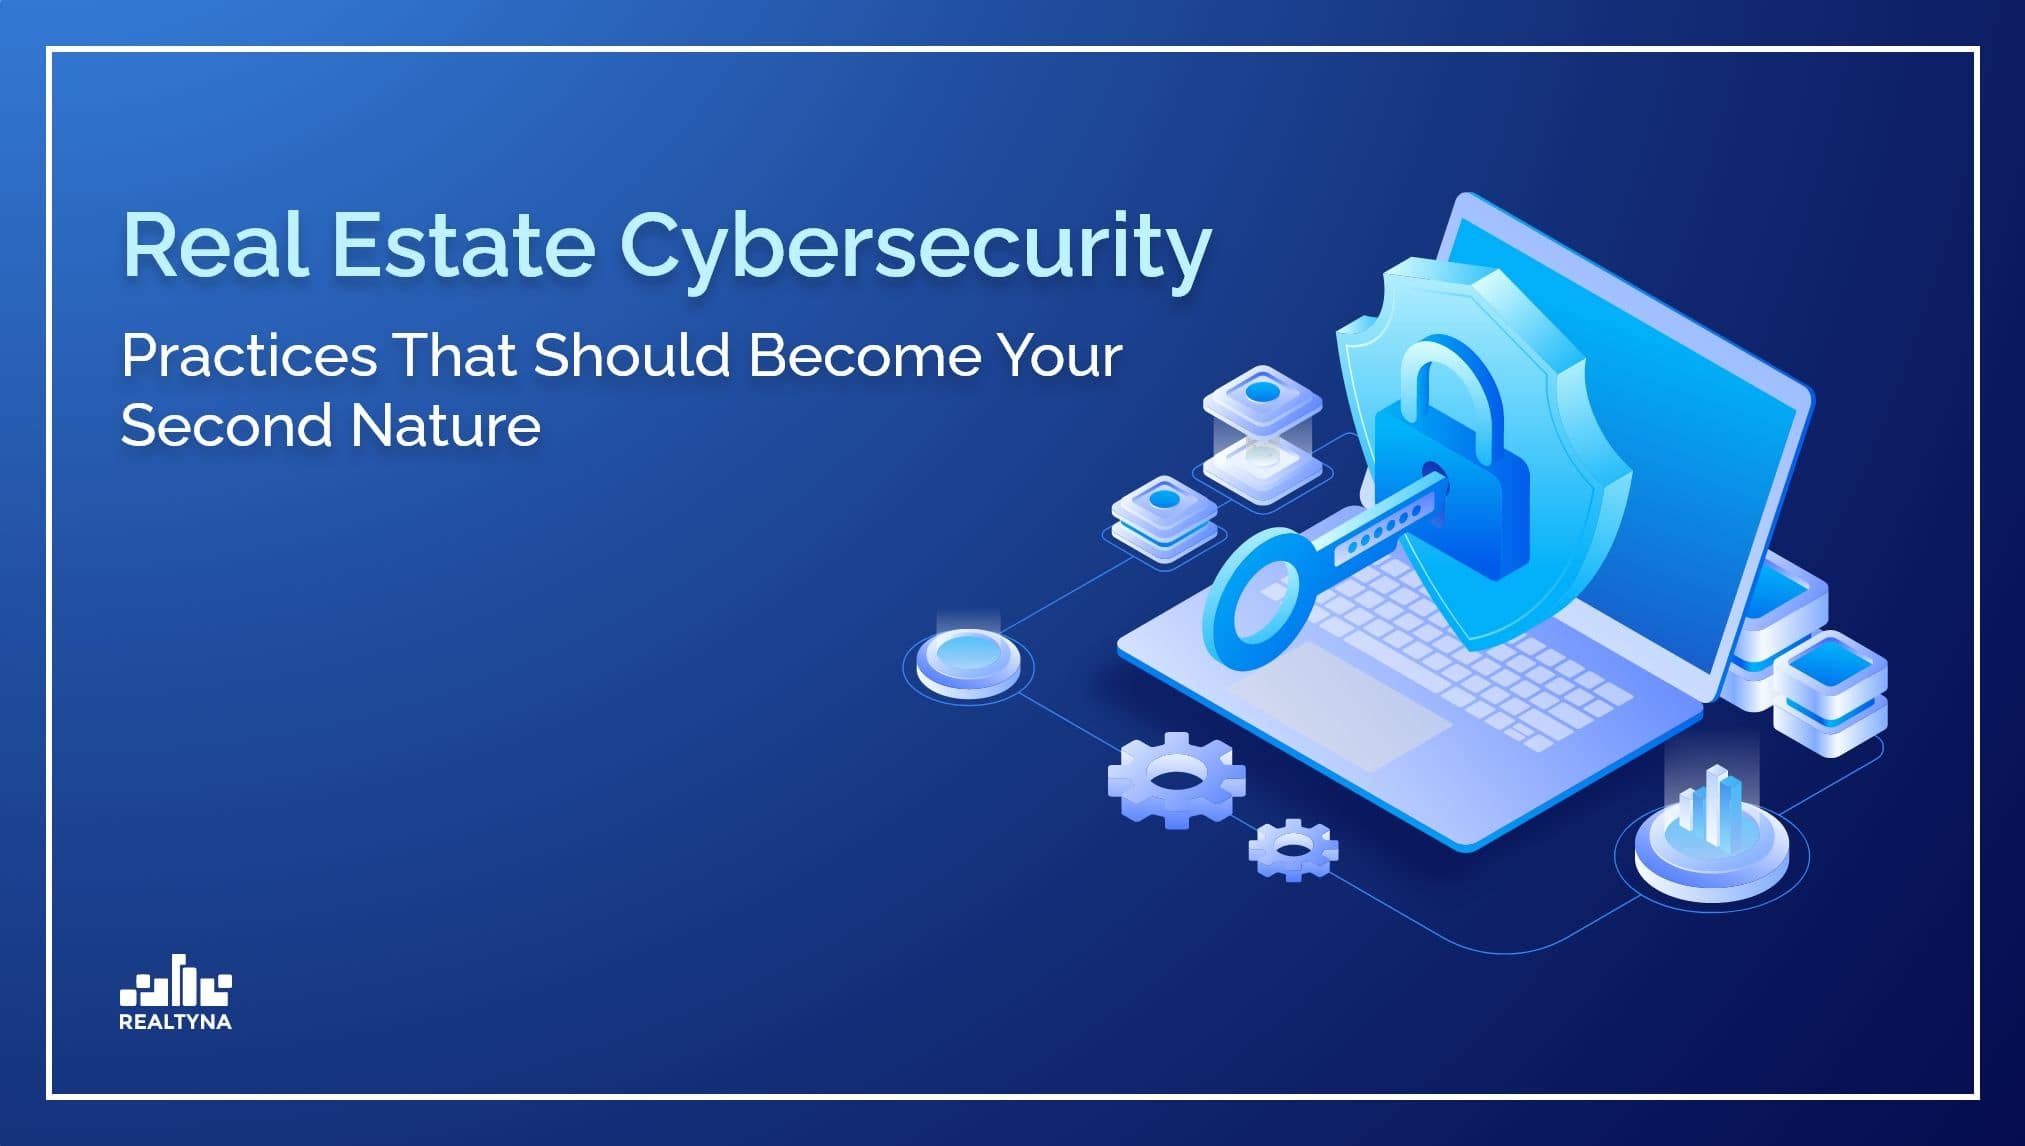 Real Estate Cybersecurity